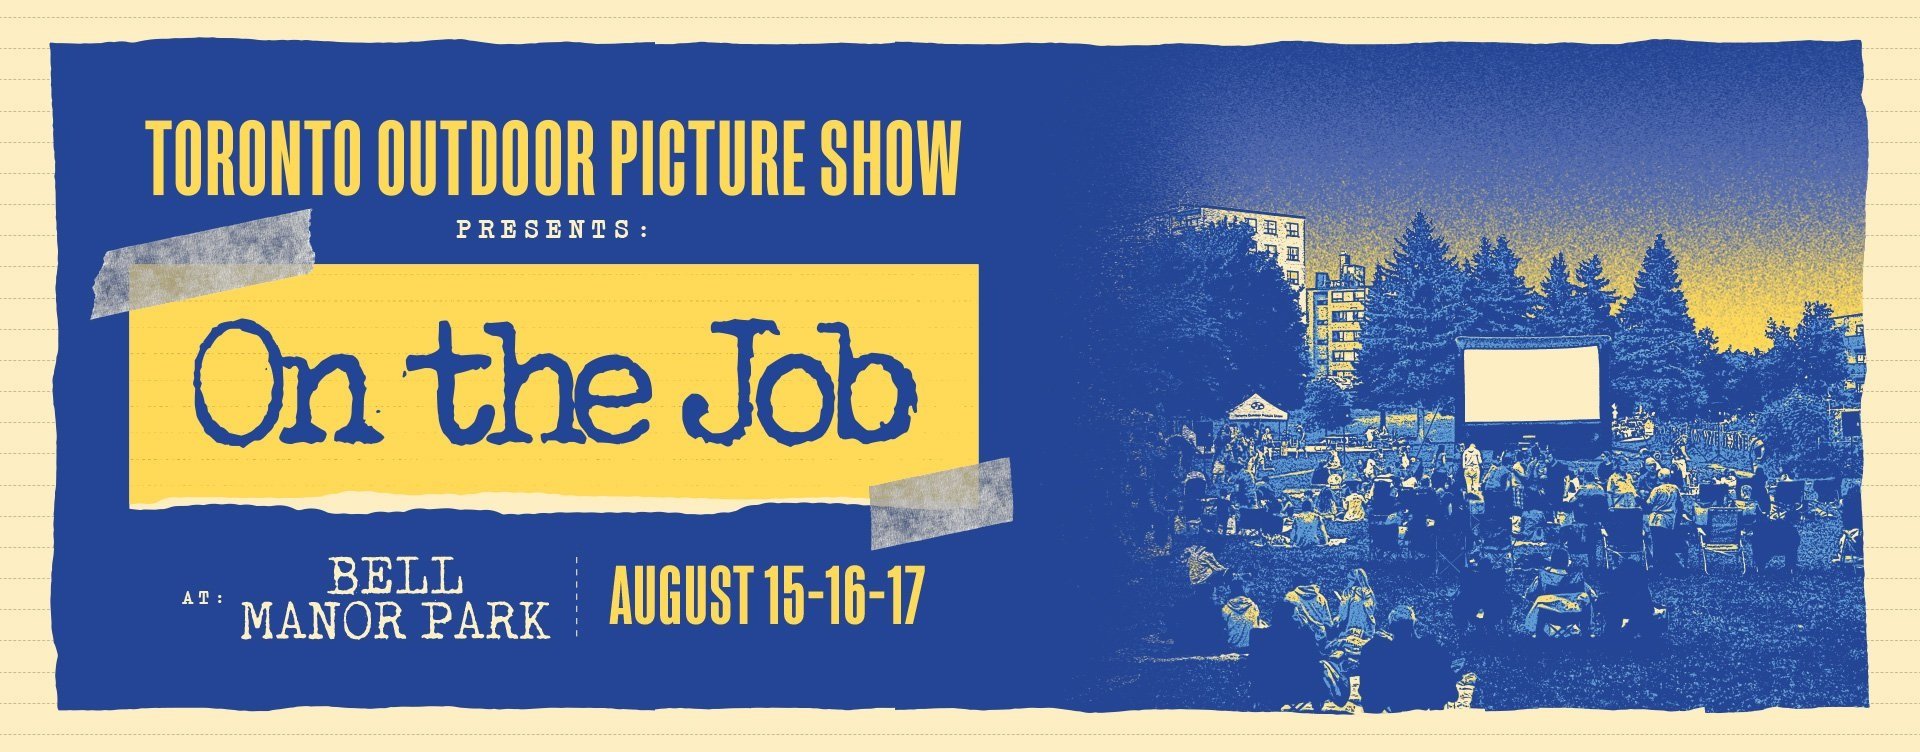 TOPS presents "On the Job" at Bell Manor Park - Aug 15-17